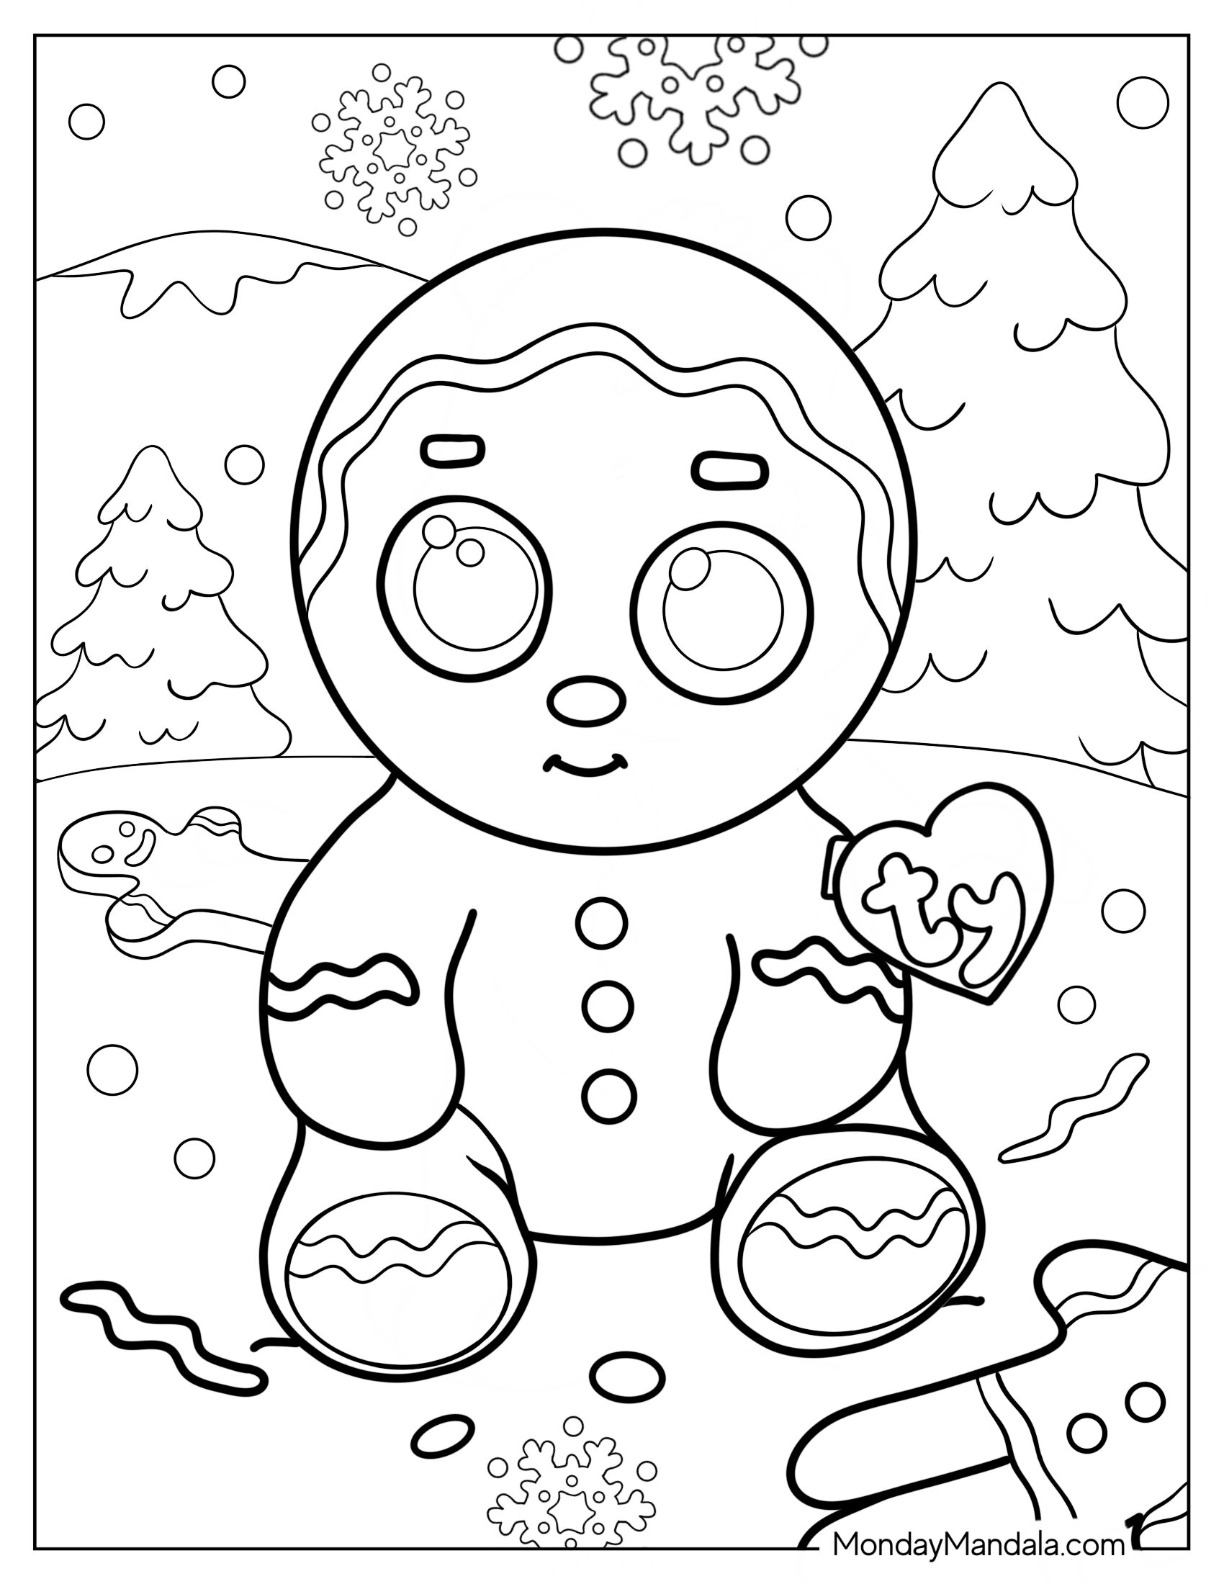 34 Cute Beanie Boos Coloring Pages Printable 33